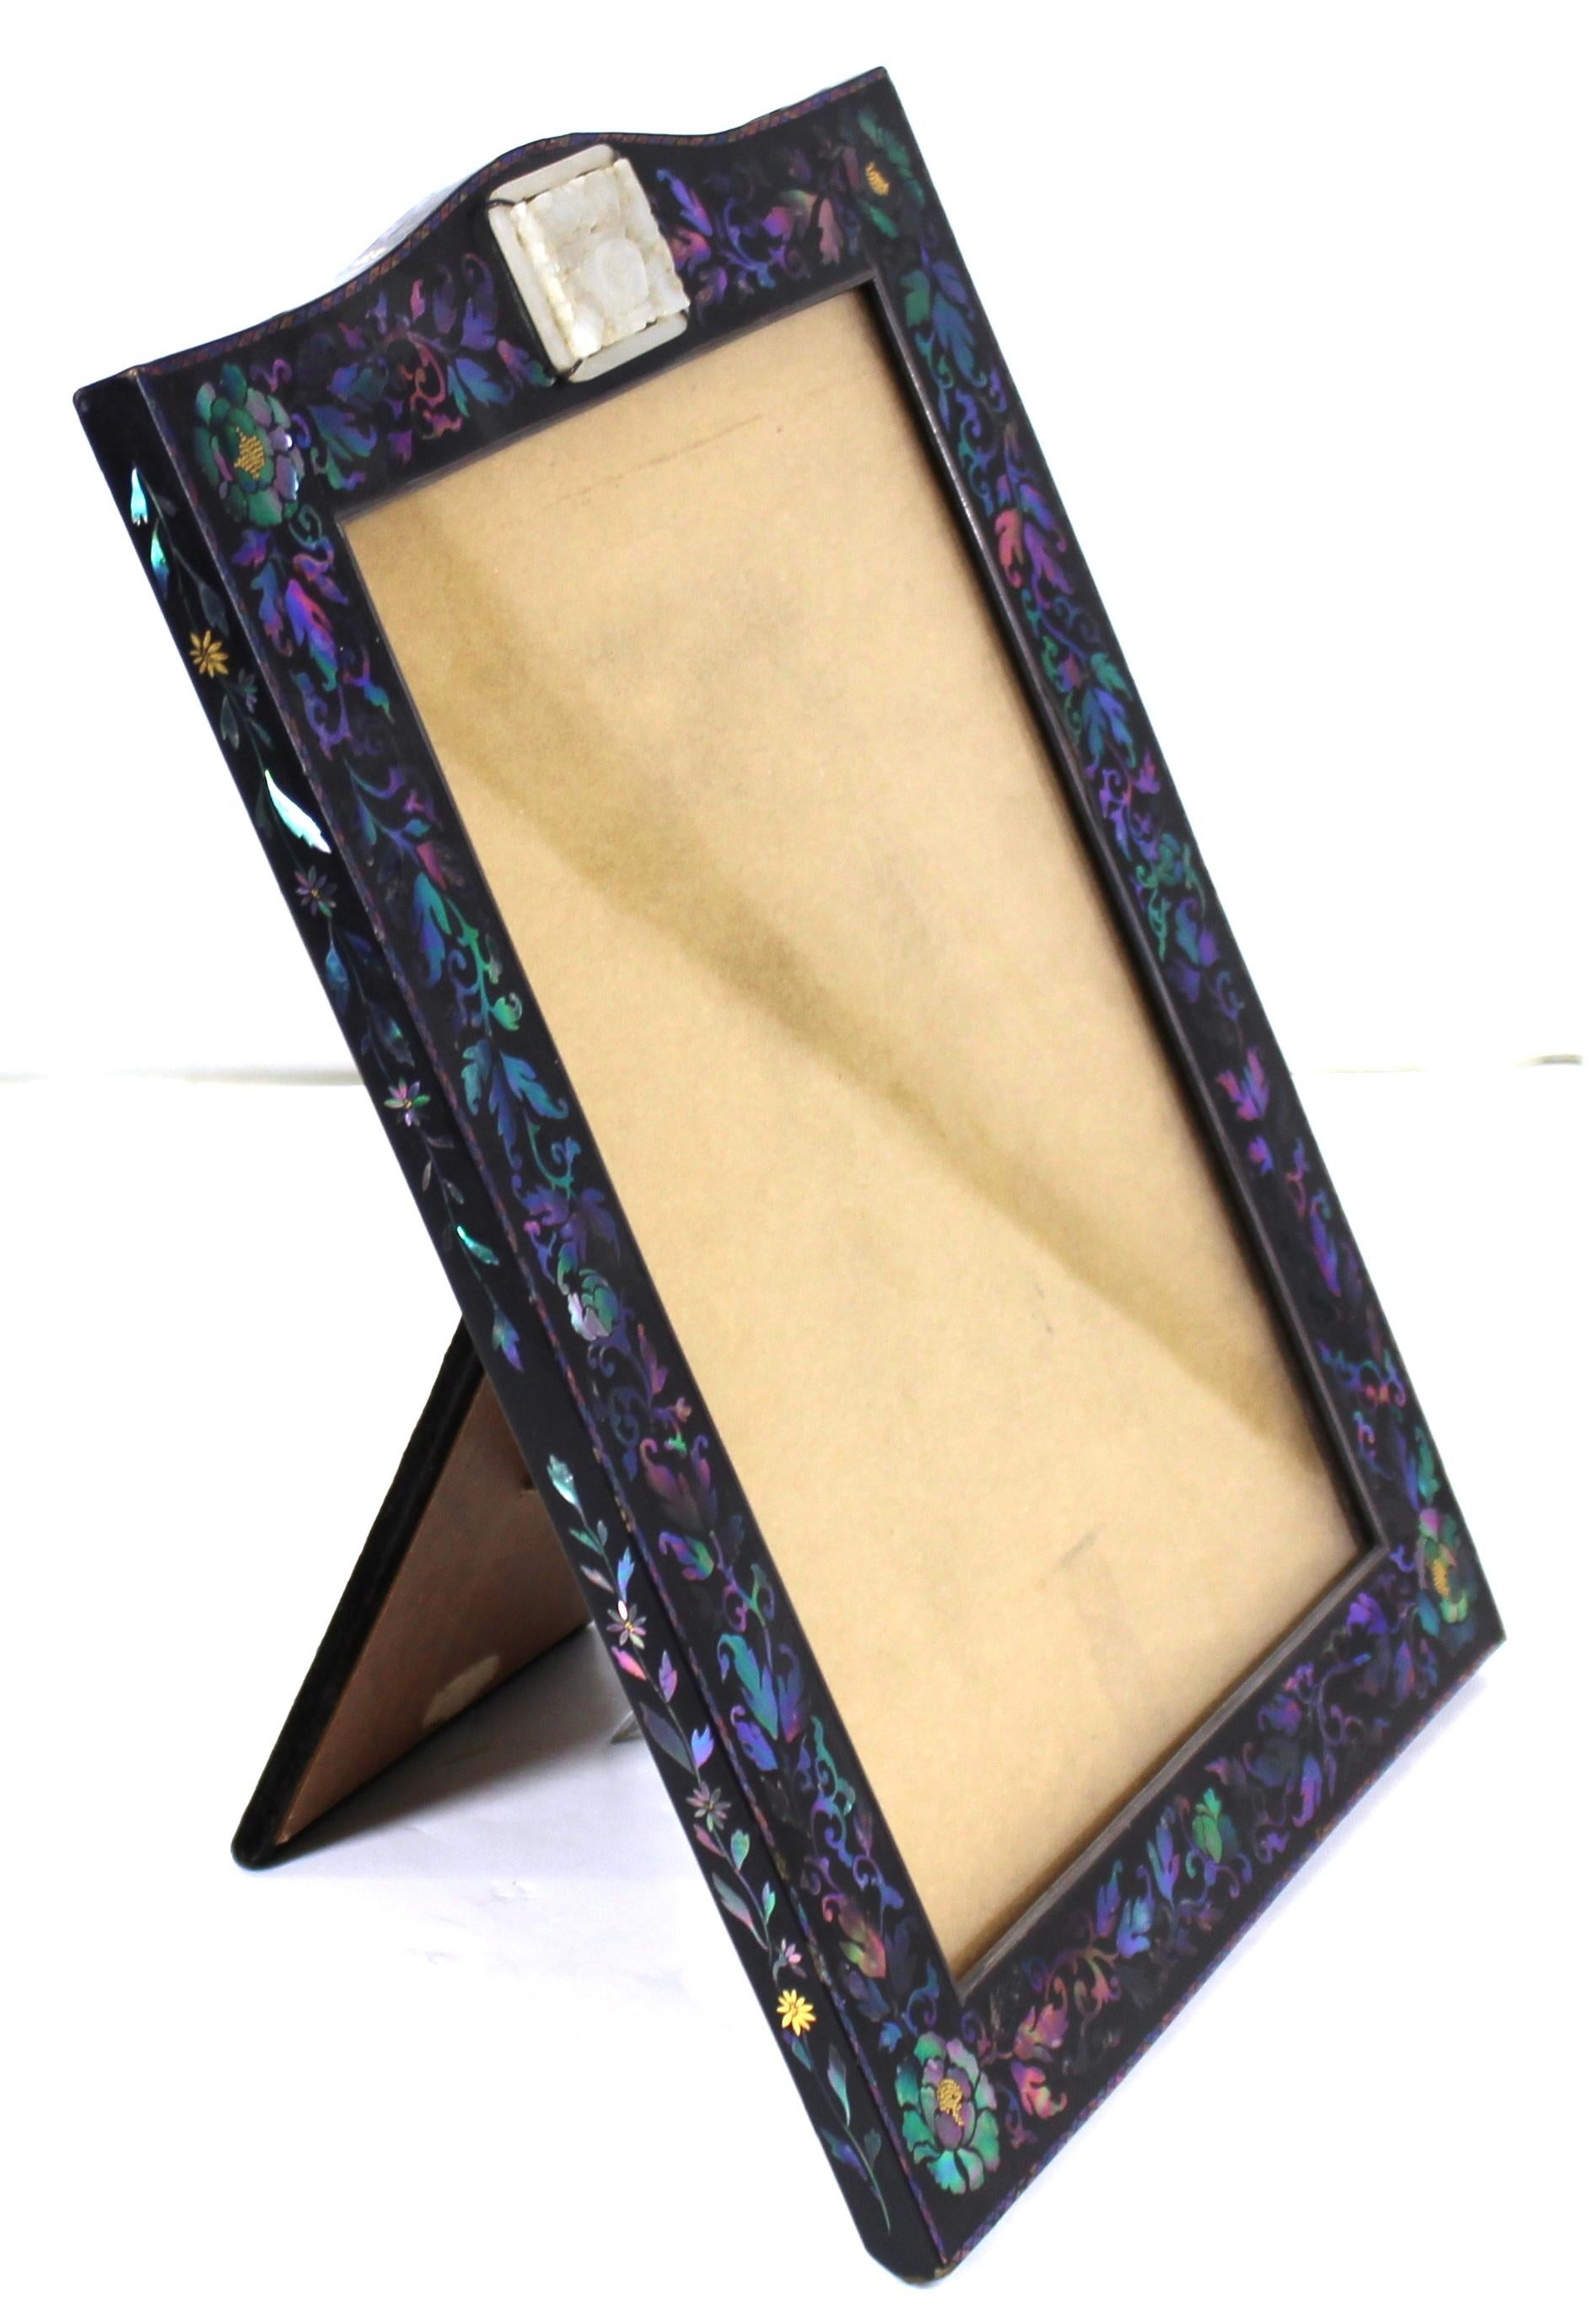 Late 19th Century Chinese Export Lac Burgaute Inlaid Silver, Gold & Abalone Frame with Carved Jade For Sale